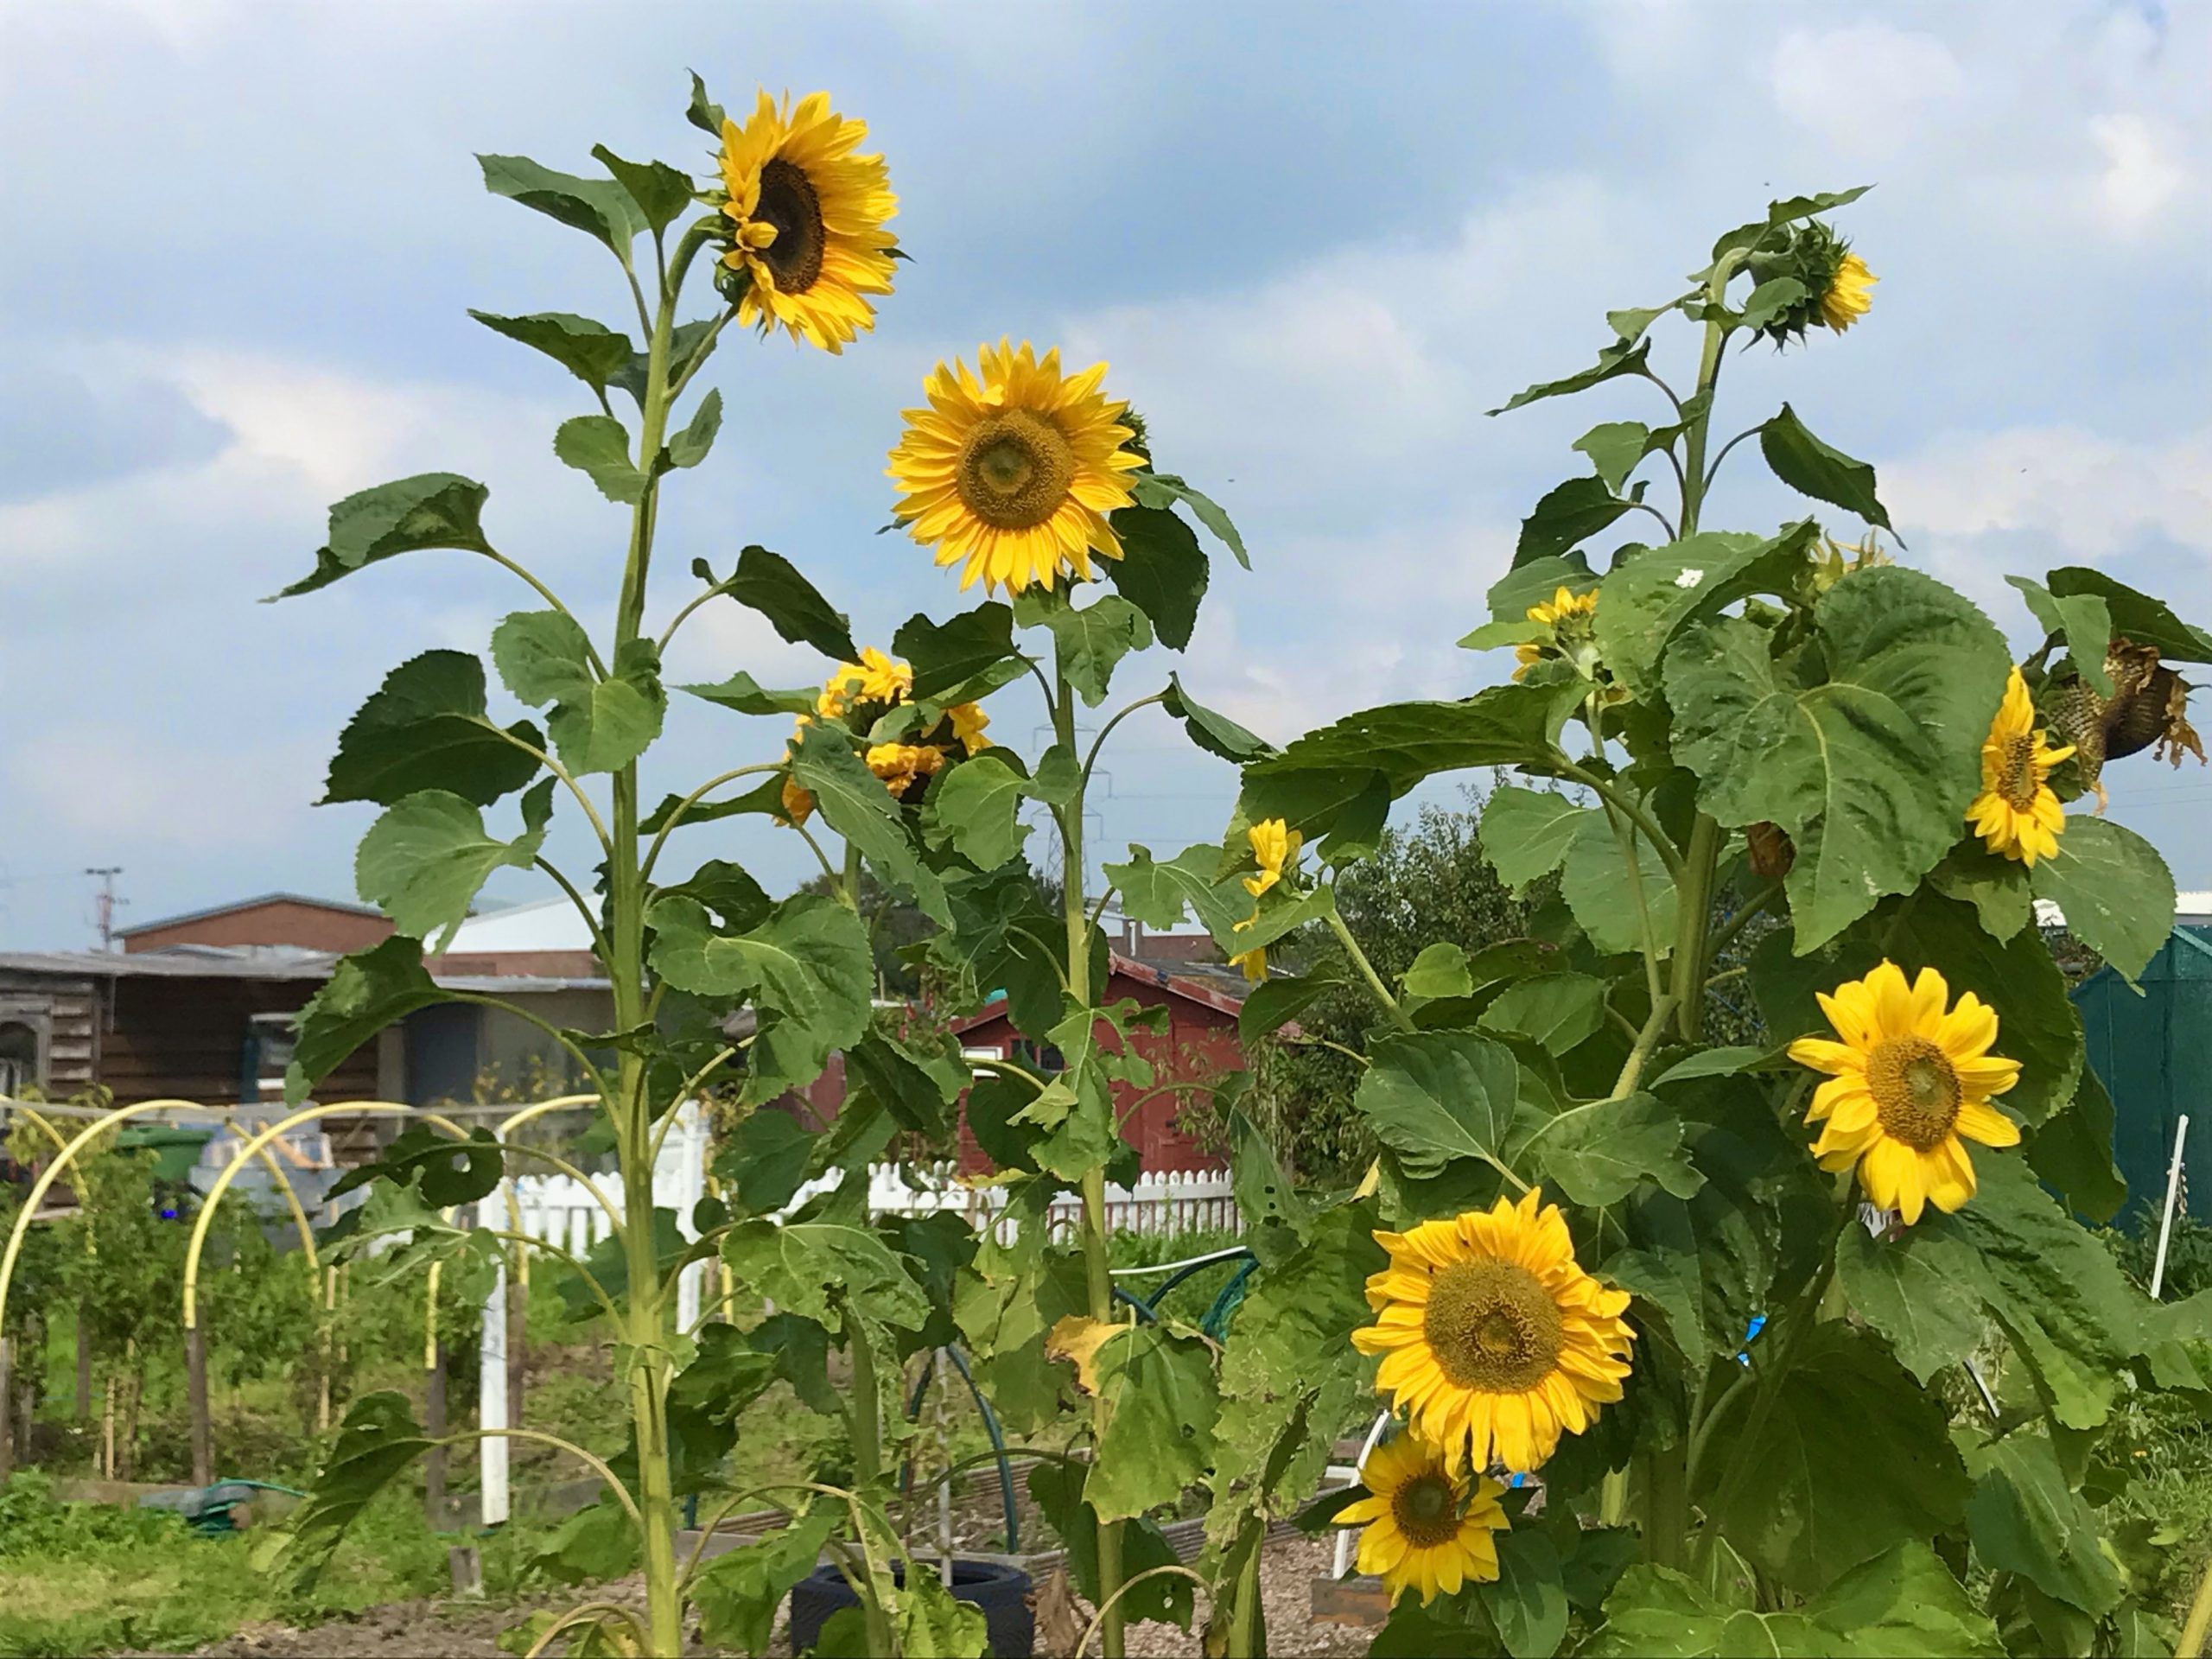 Sunflowers at the Churchdale Allotments